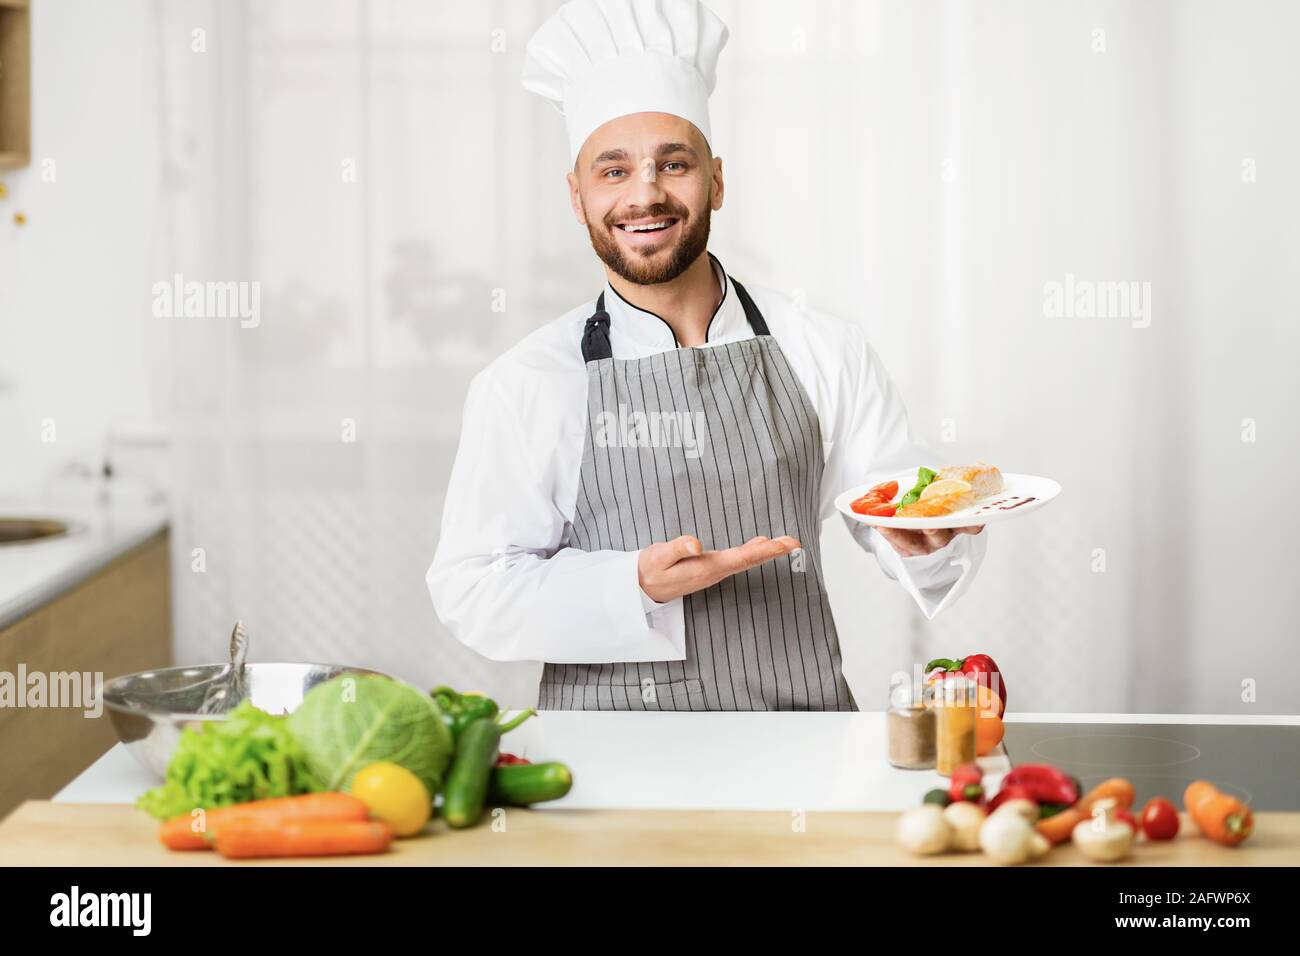 Chef Man Holding Plate Presenting Dish Standing In Kitchen Indoor Stock Photo